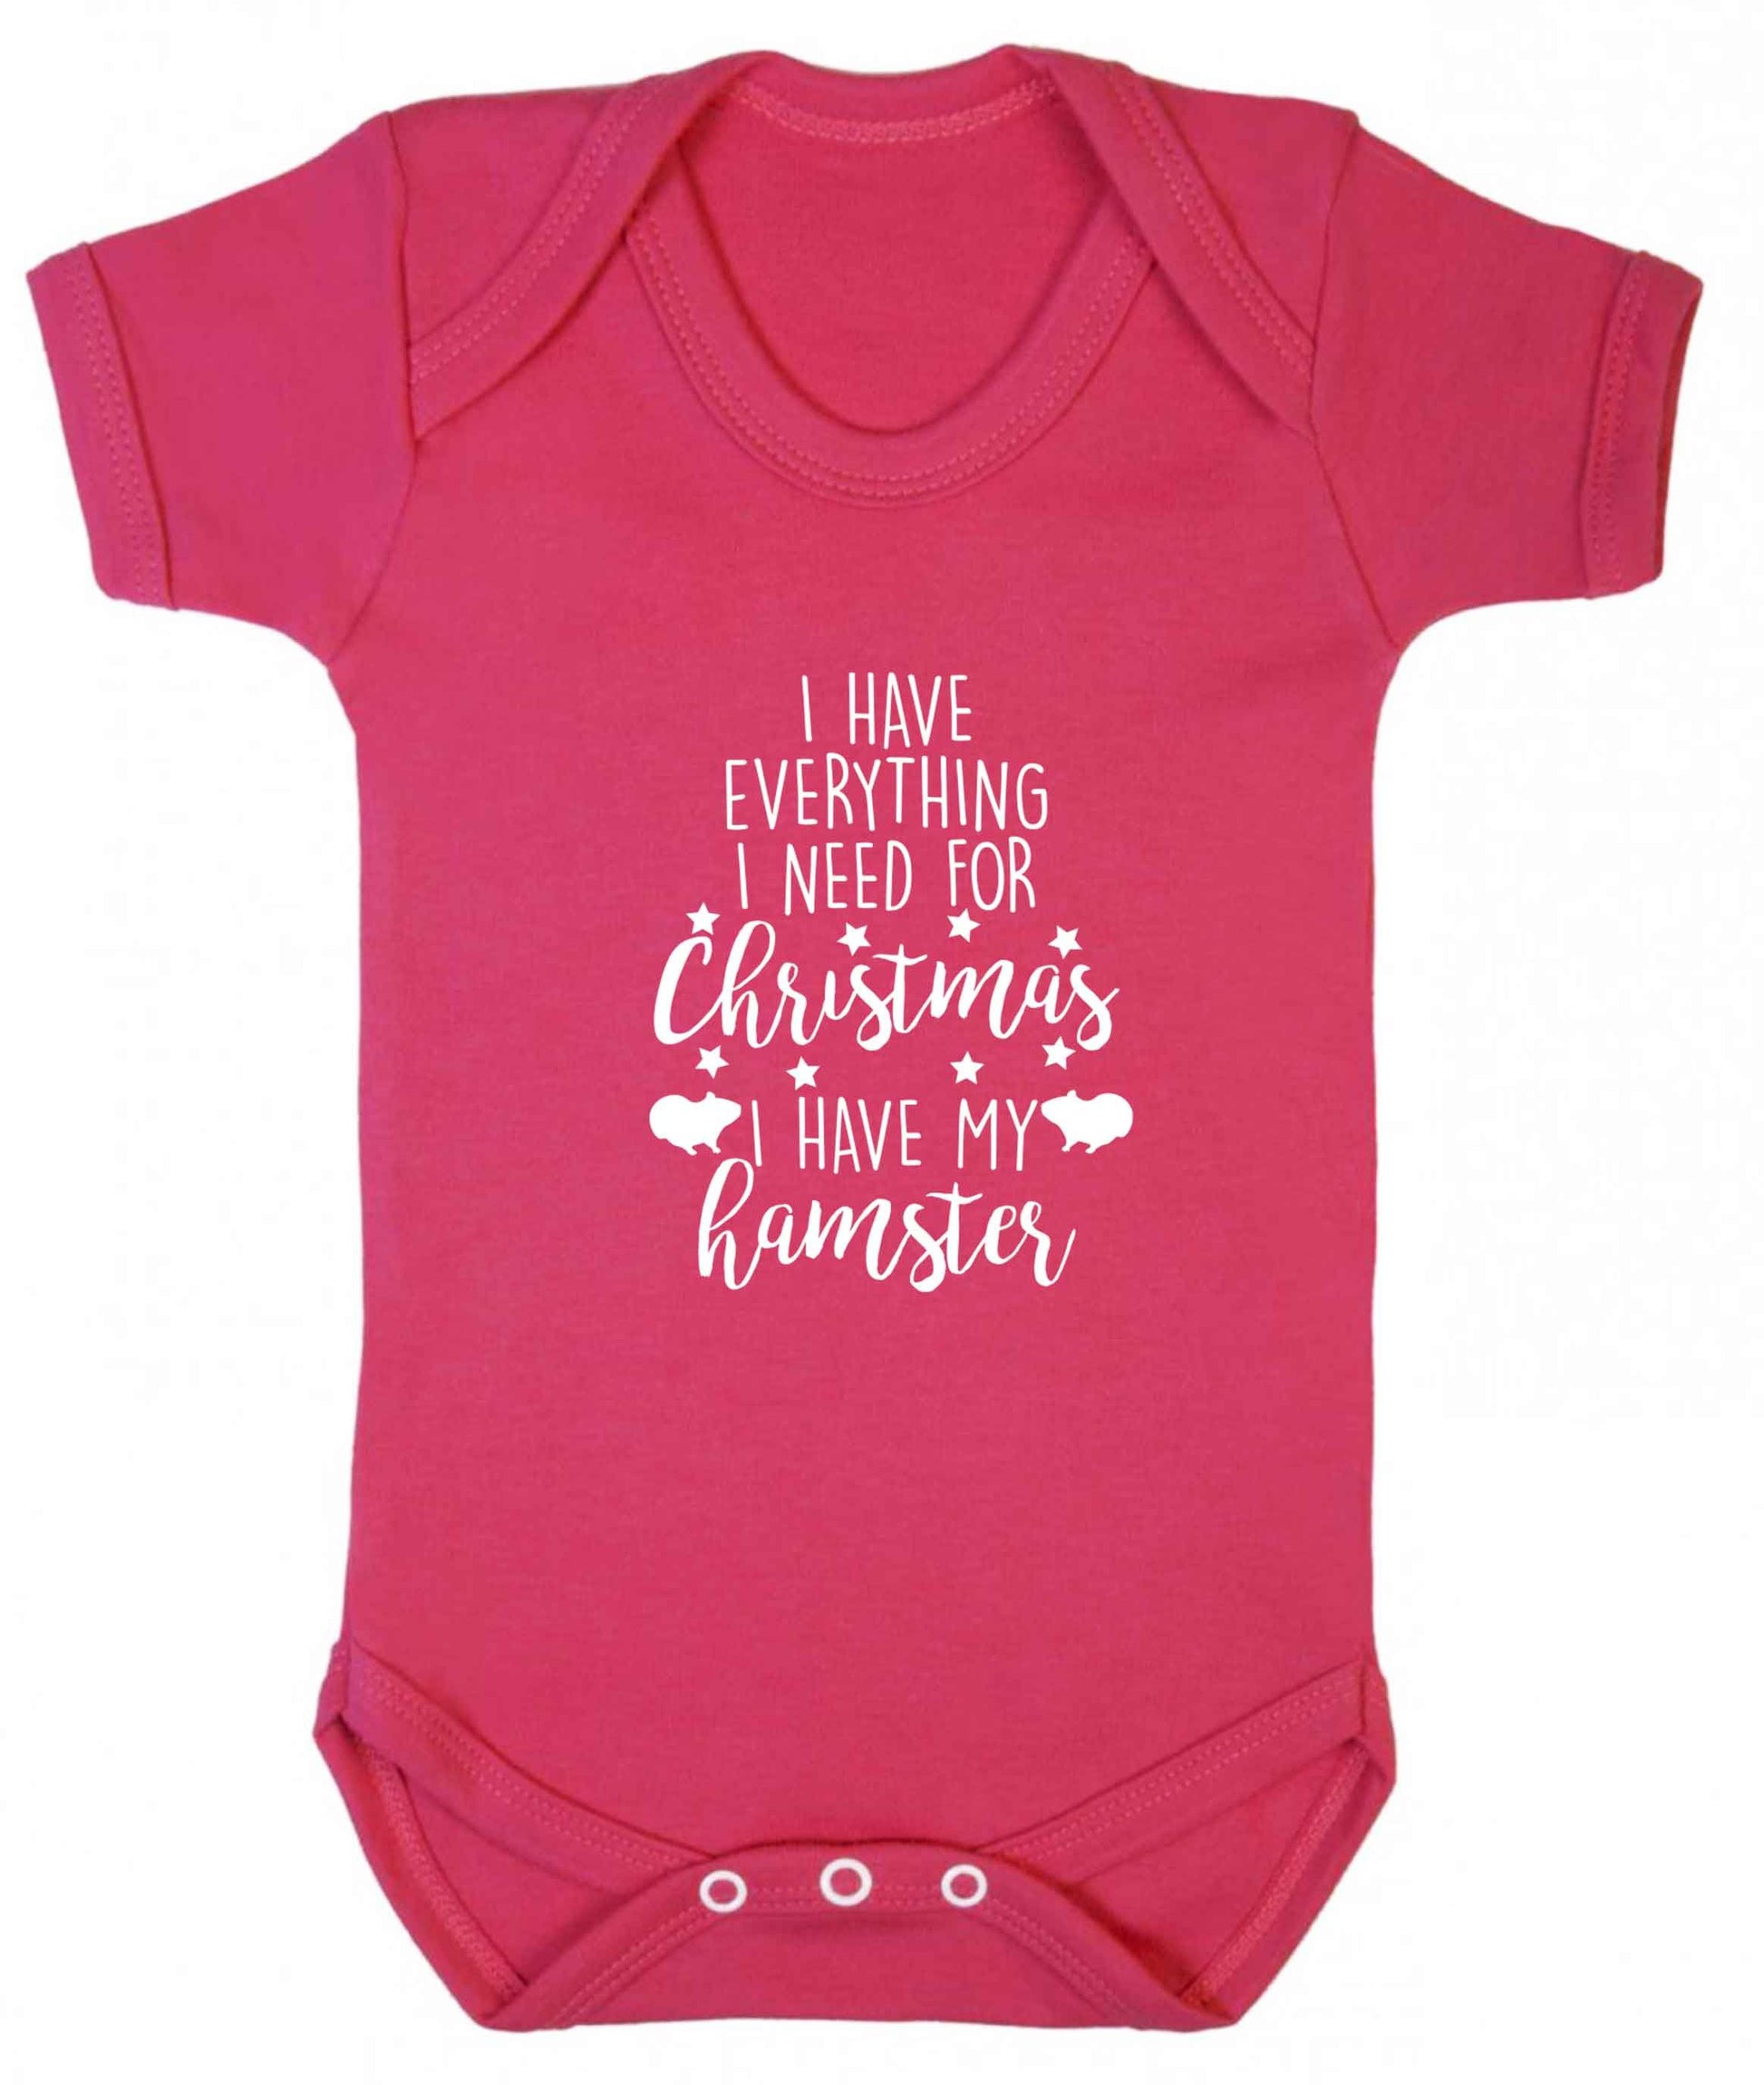 I have everything I need for Christmas I have my hamster baby vest dark pink 18-24 months